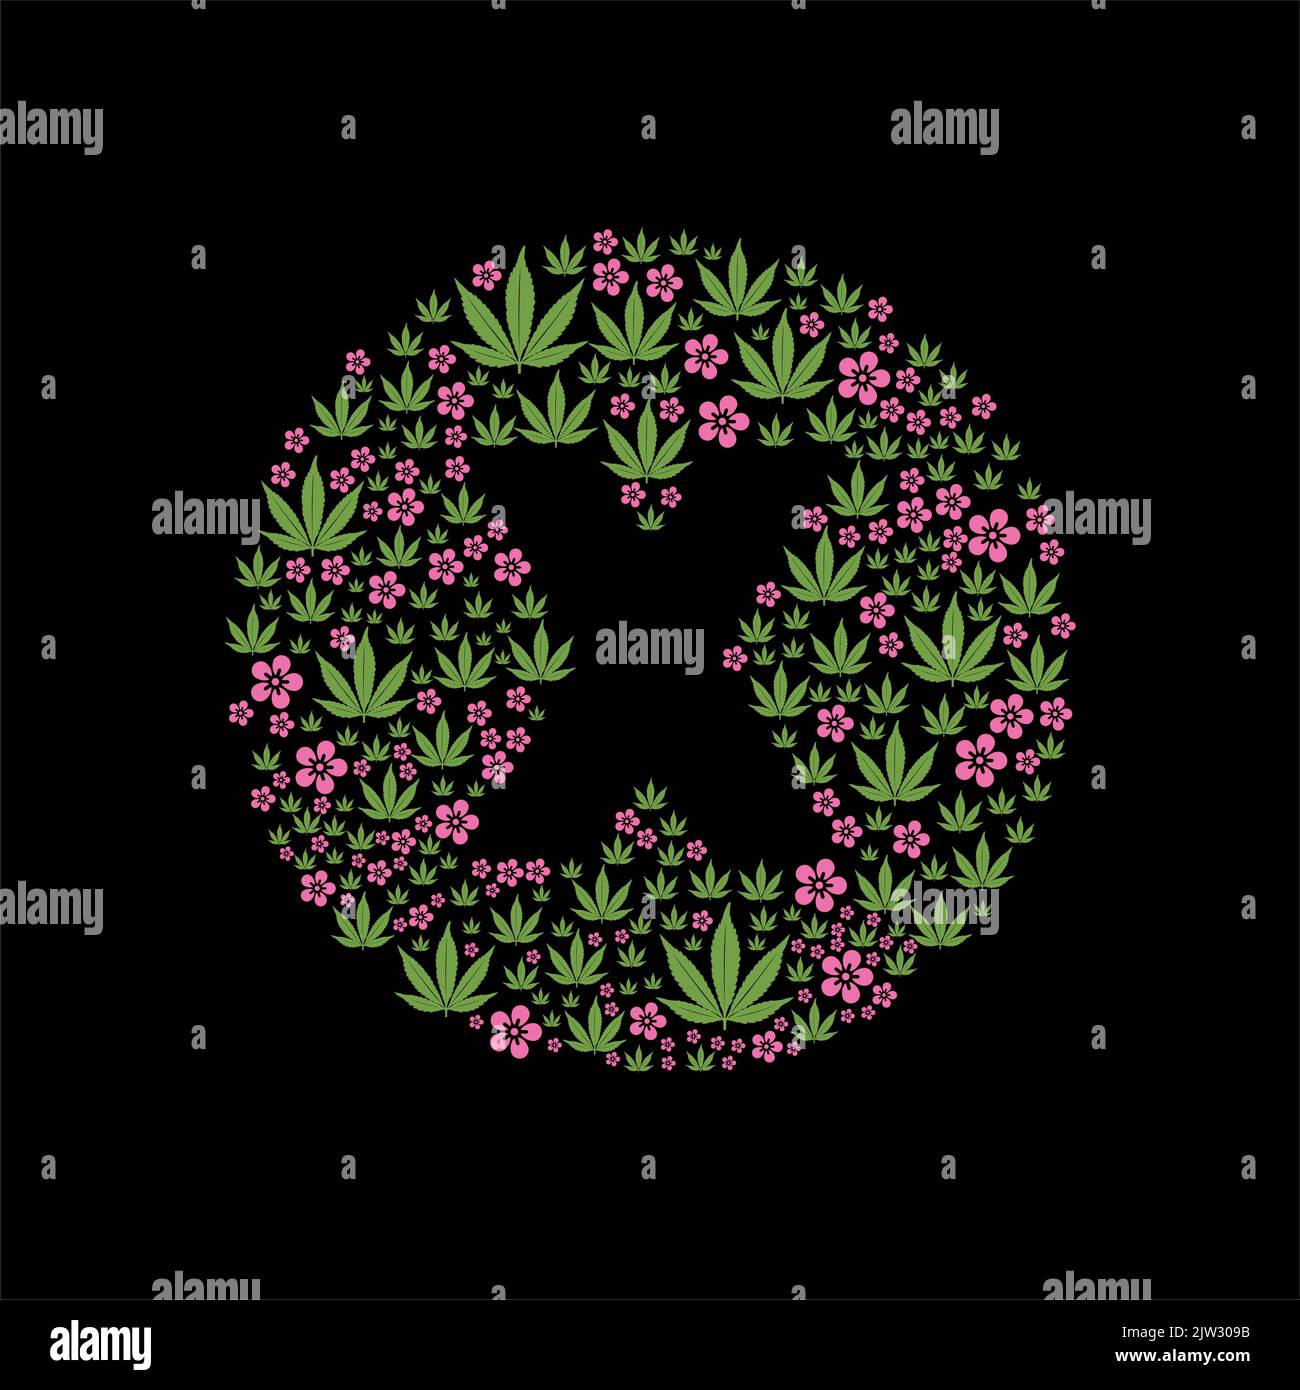 X and Marijuana Leaf Flower for Unknown Chemical Compound symbol logo design Stock Vector